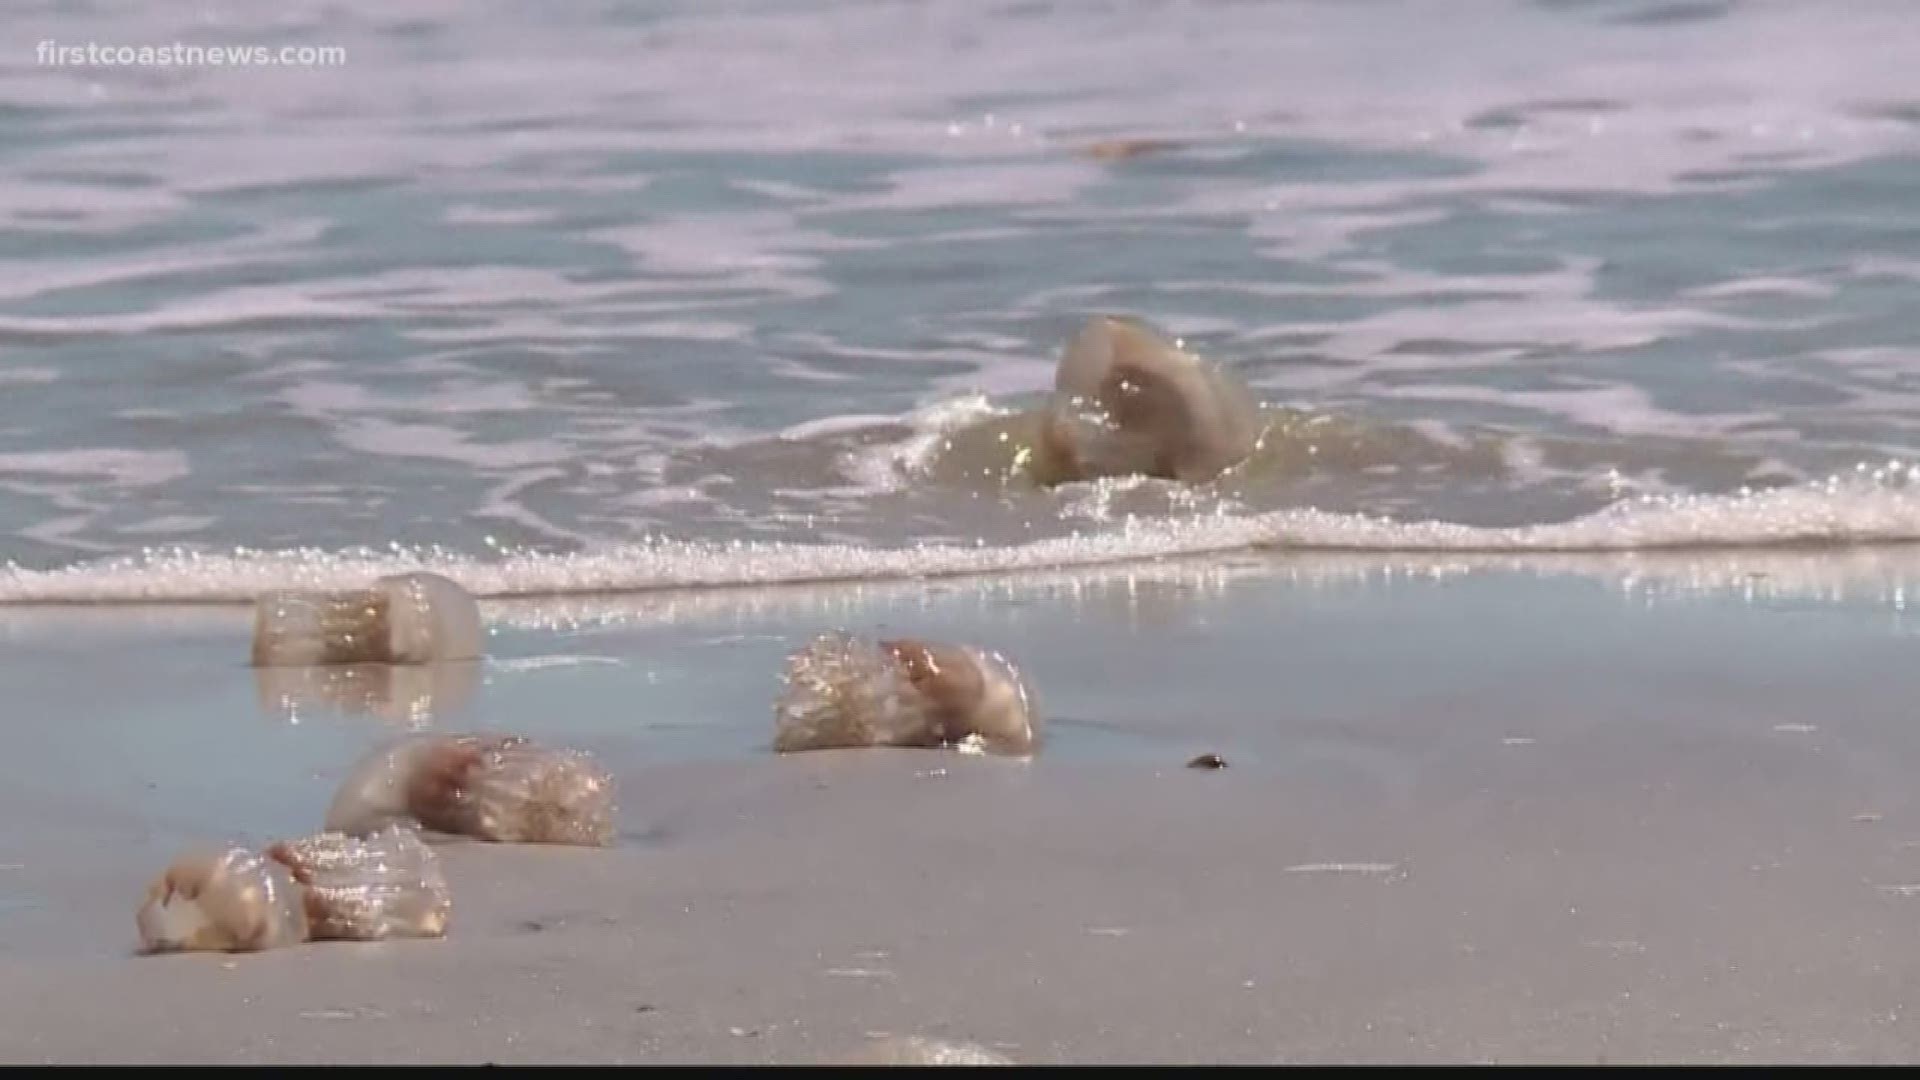 The Jacksonville Beach Lifeguards say that this time of year, their biggest issue at the beach is jellyfish.